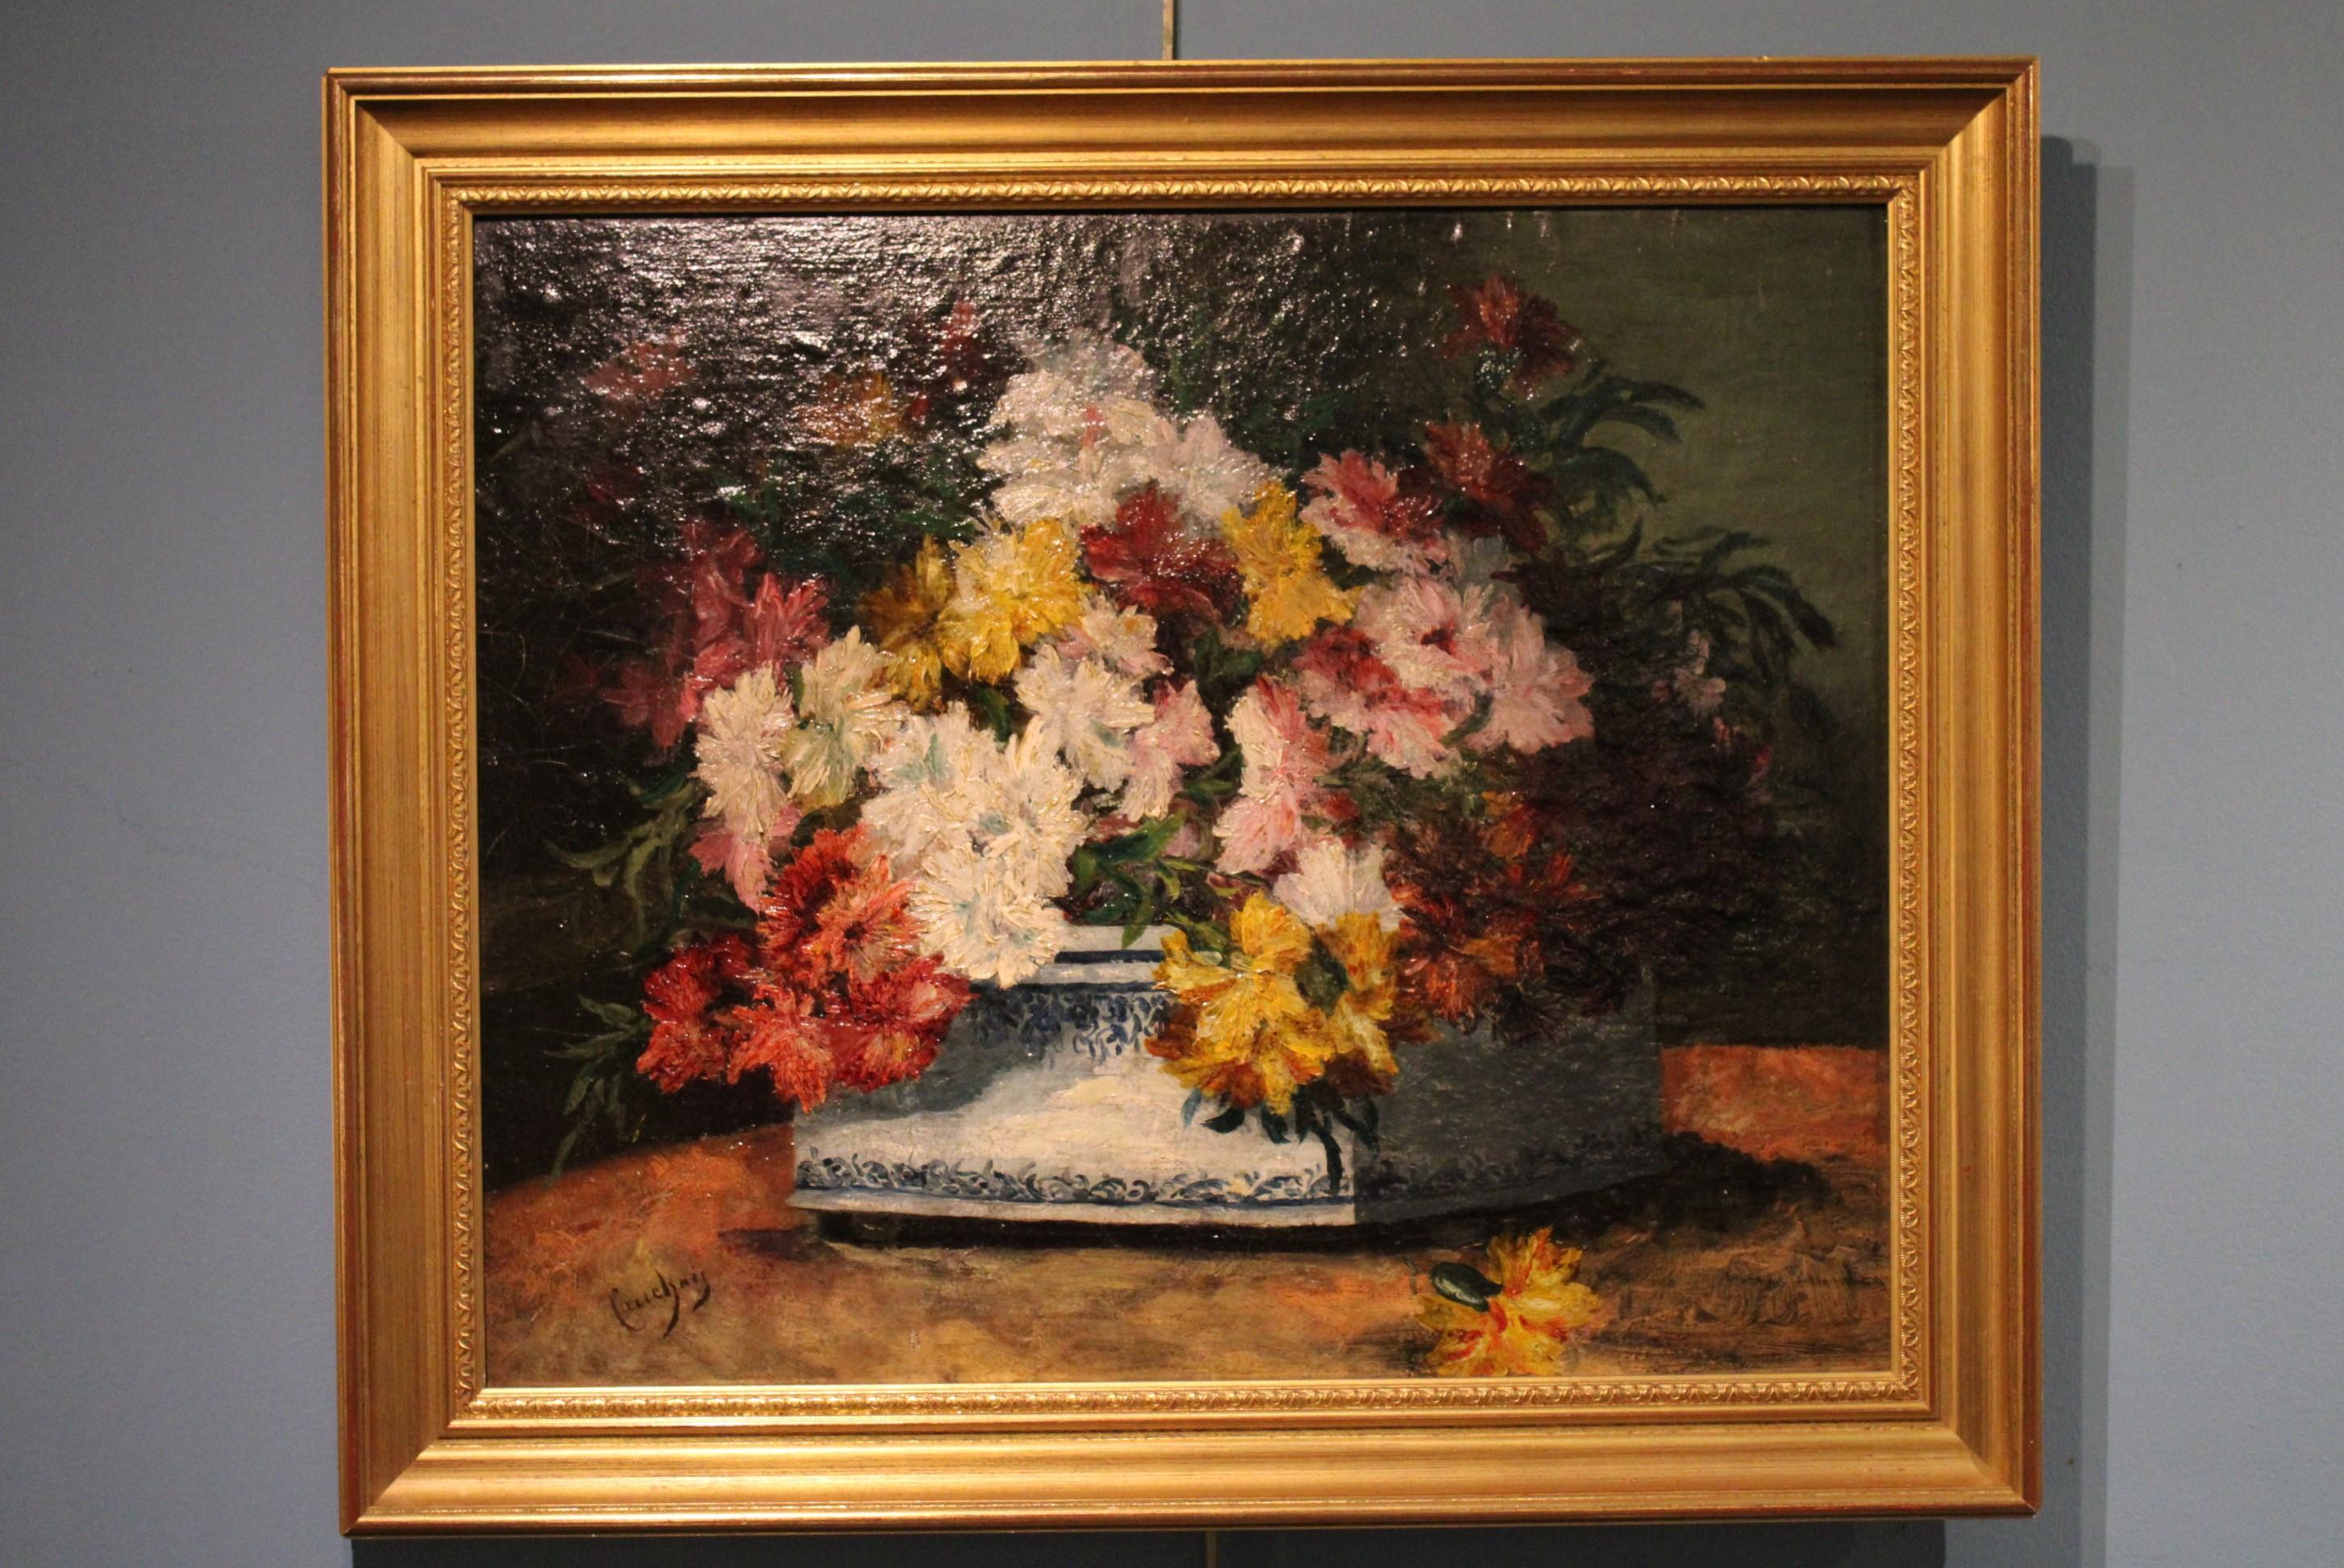 Basket of flowers, painting by Eugène Henri Cauchois (French painter, 1850-1911). 
Oil on panel, signed.
 Eugène Henri Cauchois is a genre painter, landscapes, seascapes and still lifes.
His works are kept in French museums : at Louviers,